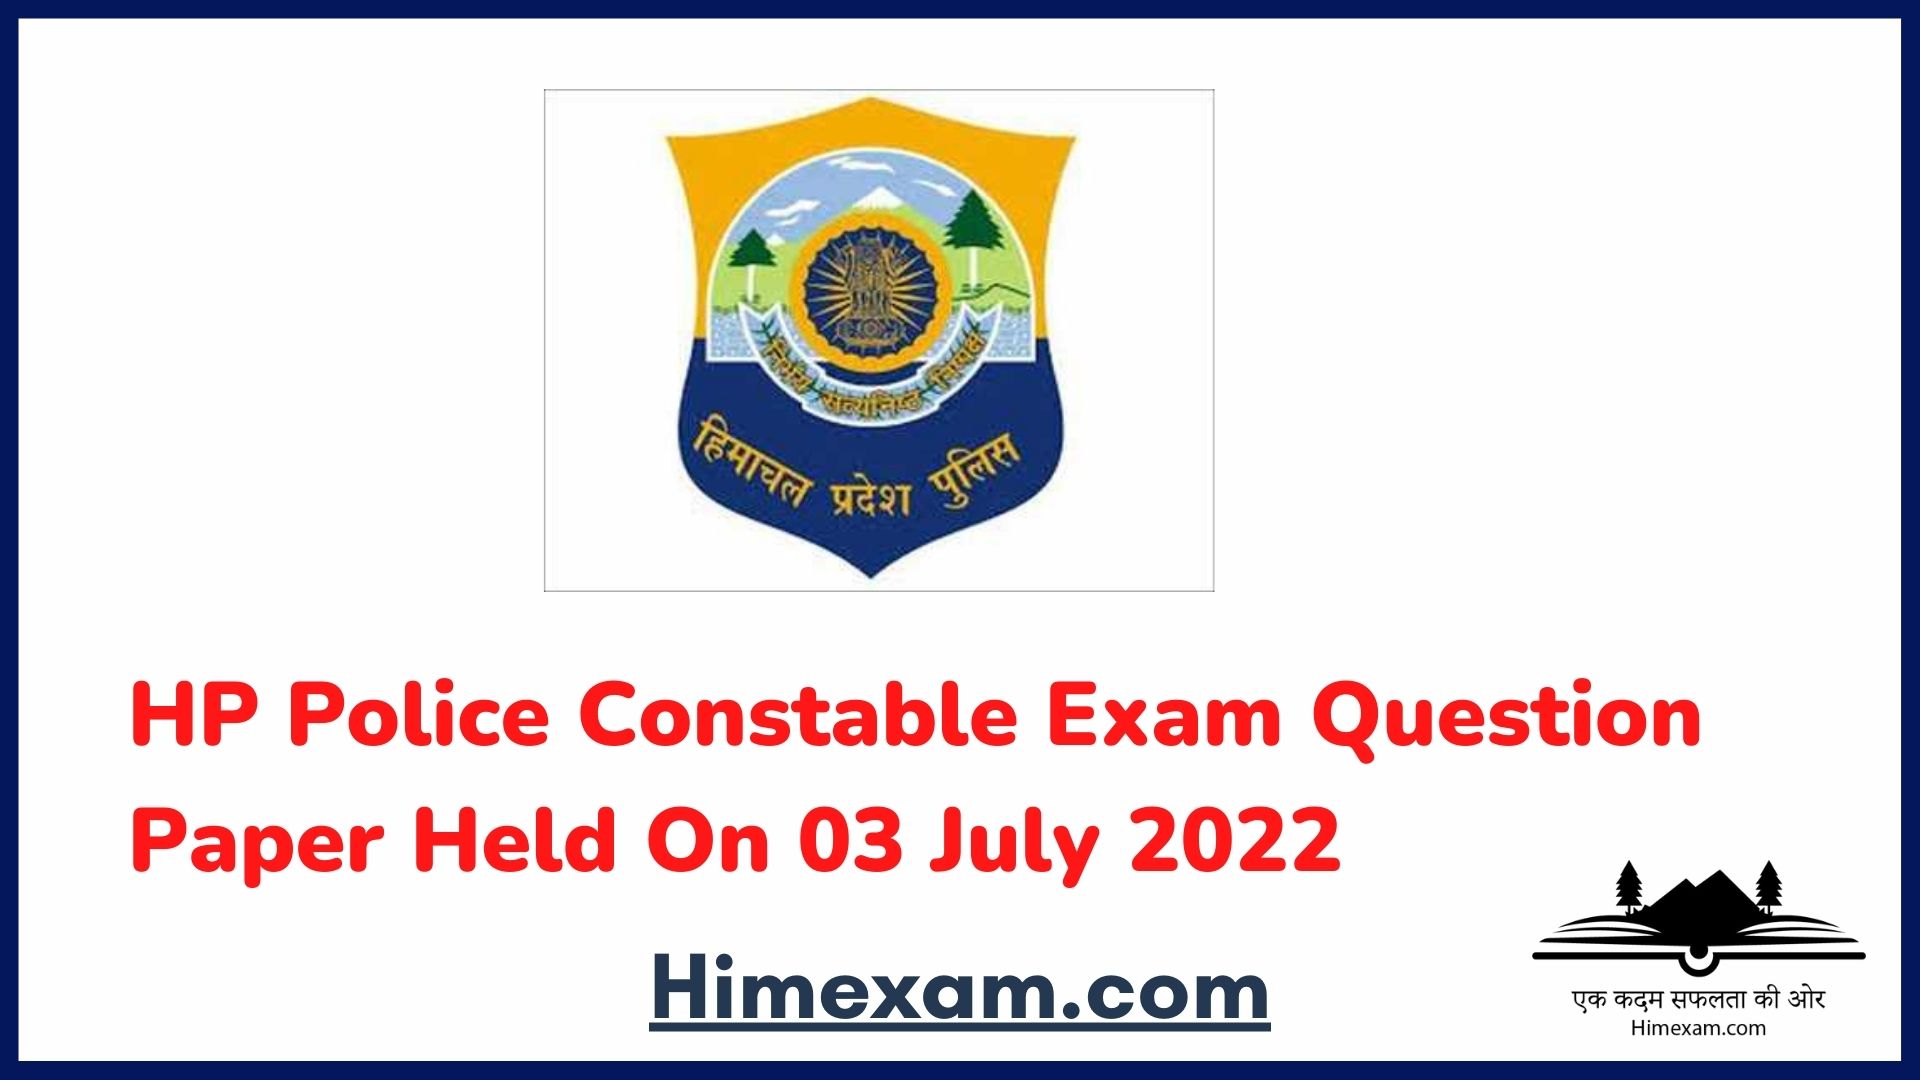 HP Police Constable Exam Question Paper Held On 03 July 2022